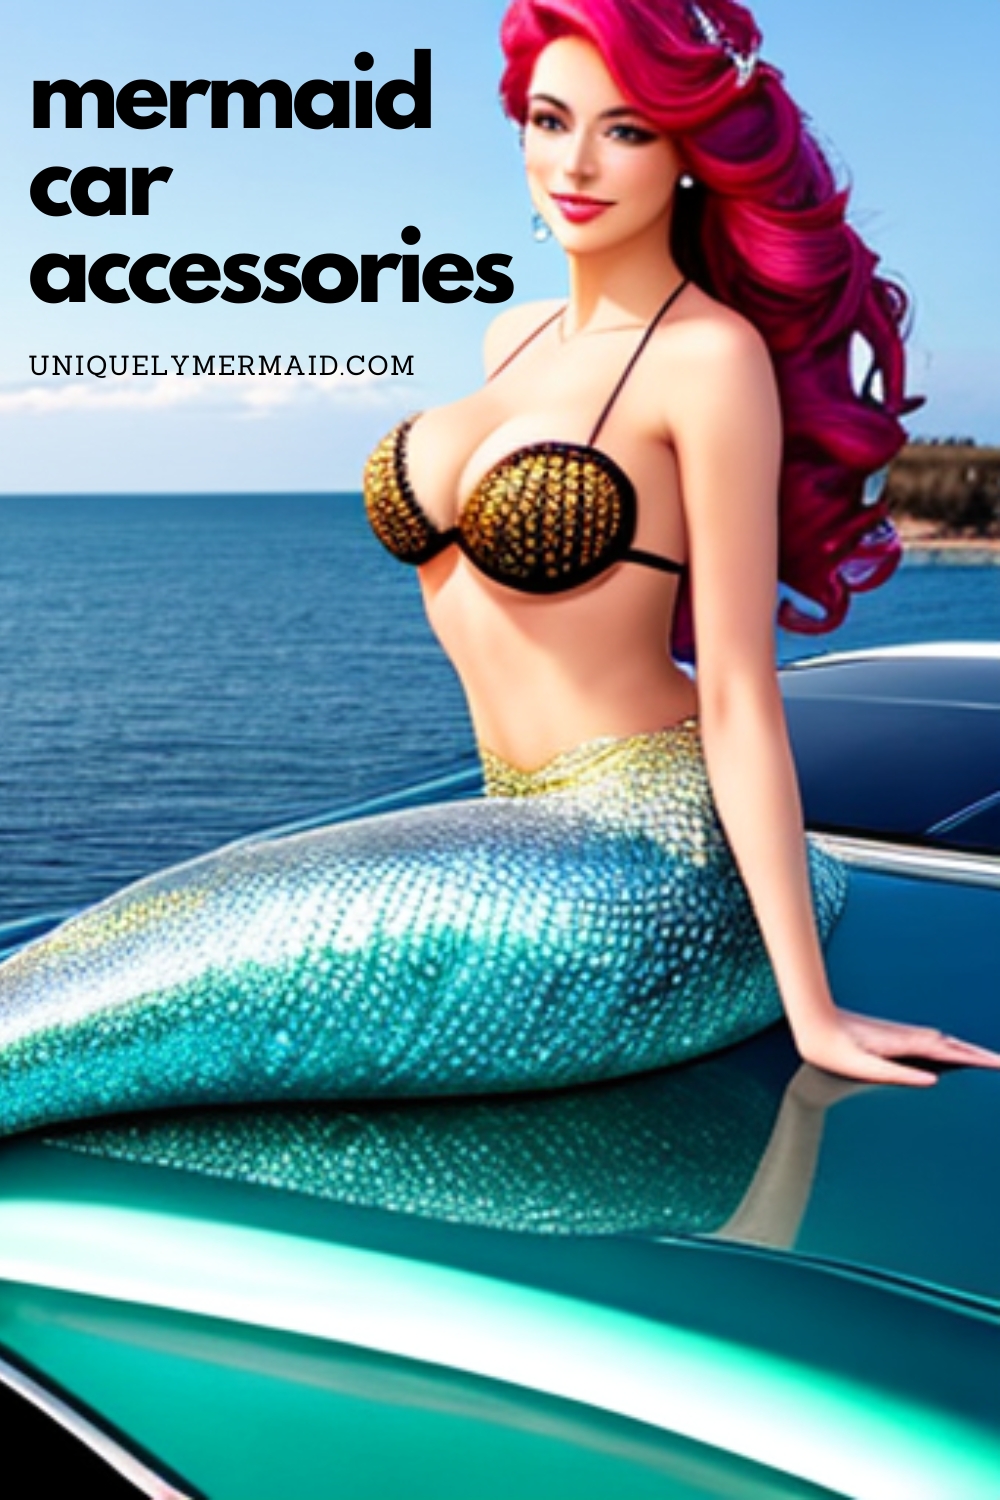 Ramp up and redecorate your vehicle with these fun and functional mermaid car accessories.